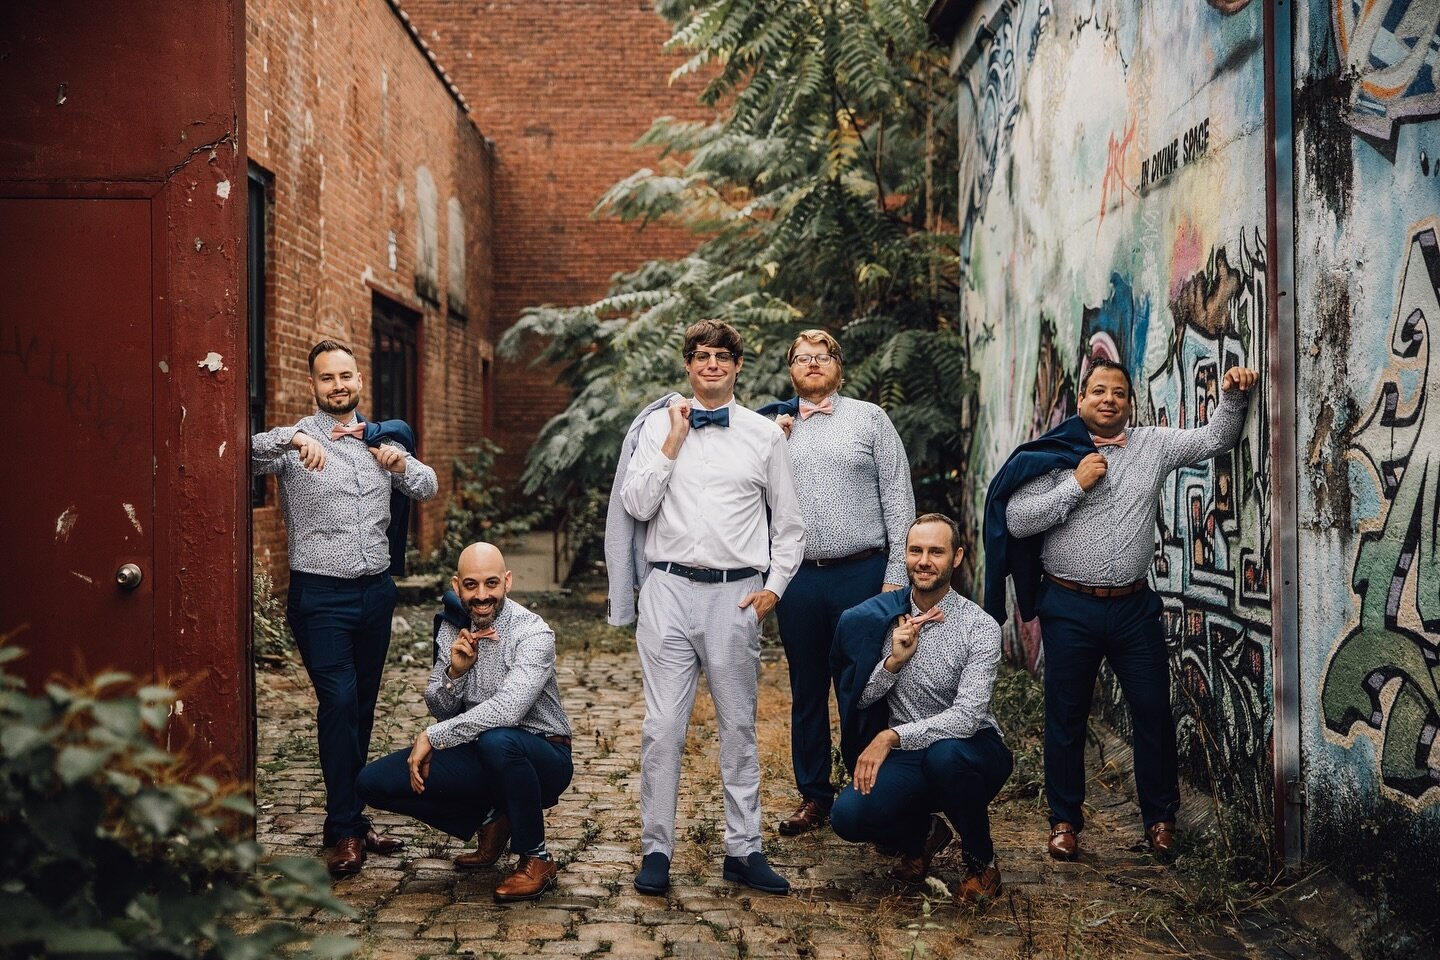 I&rsquo;ve always been a fan of the clean cut suit against a rough backdrop. The contrast between the two makes for some interesting photos. @artfactorypaterson #uniquevenue #artisticphotography #njweddingphotography #groomsmen #groomsuit